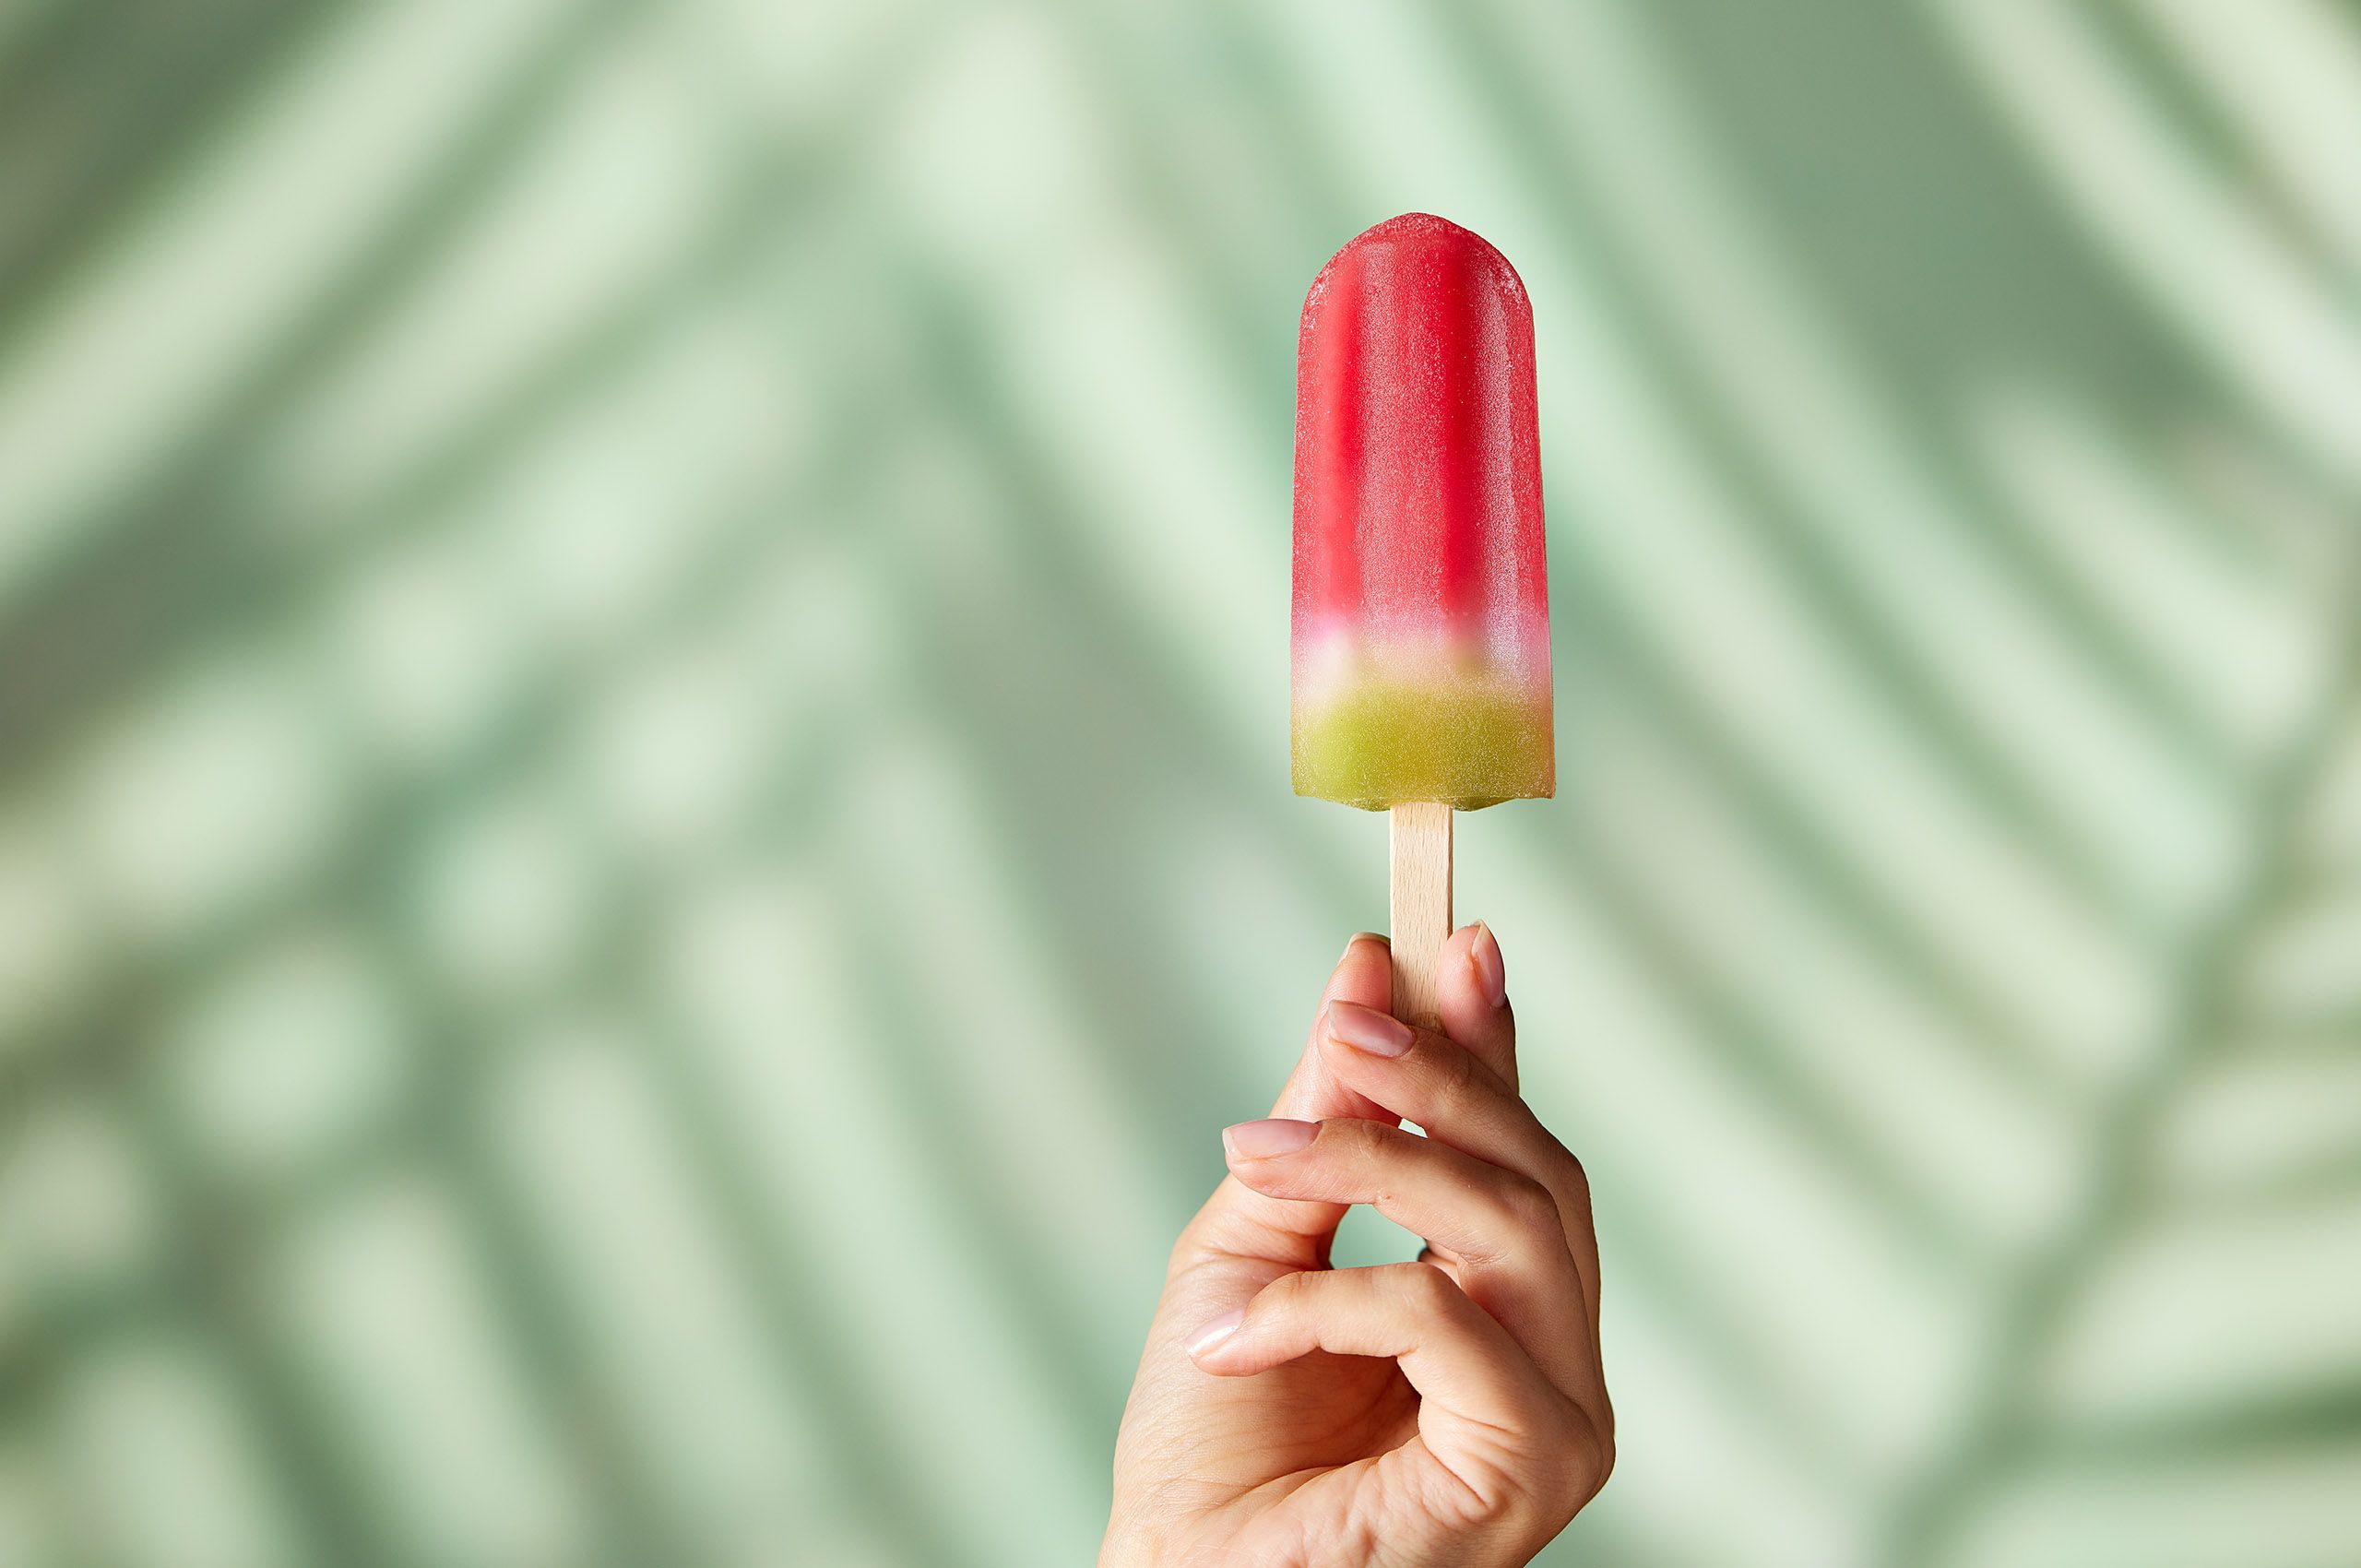 Popsicle photo by Chicago Food Photographer Jeff Schear